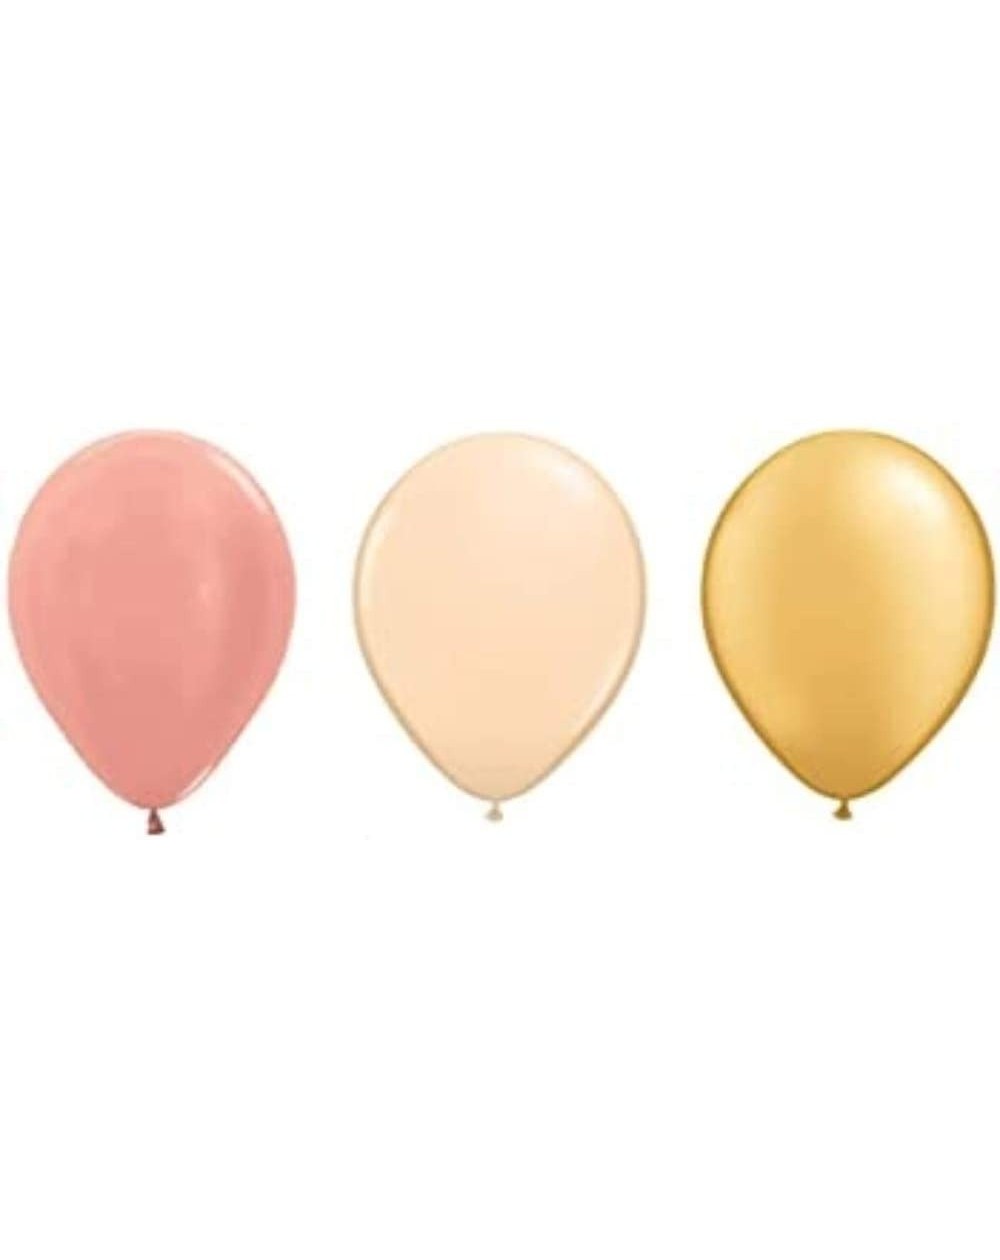 Balloons 15 new 11 inch BALLOONS party ROSE GOLD - BLUSH & GOLD vintage wedding FAVORS prom SHOWER birthday VHTF - CJ17YLXEGE...